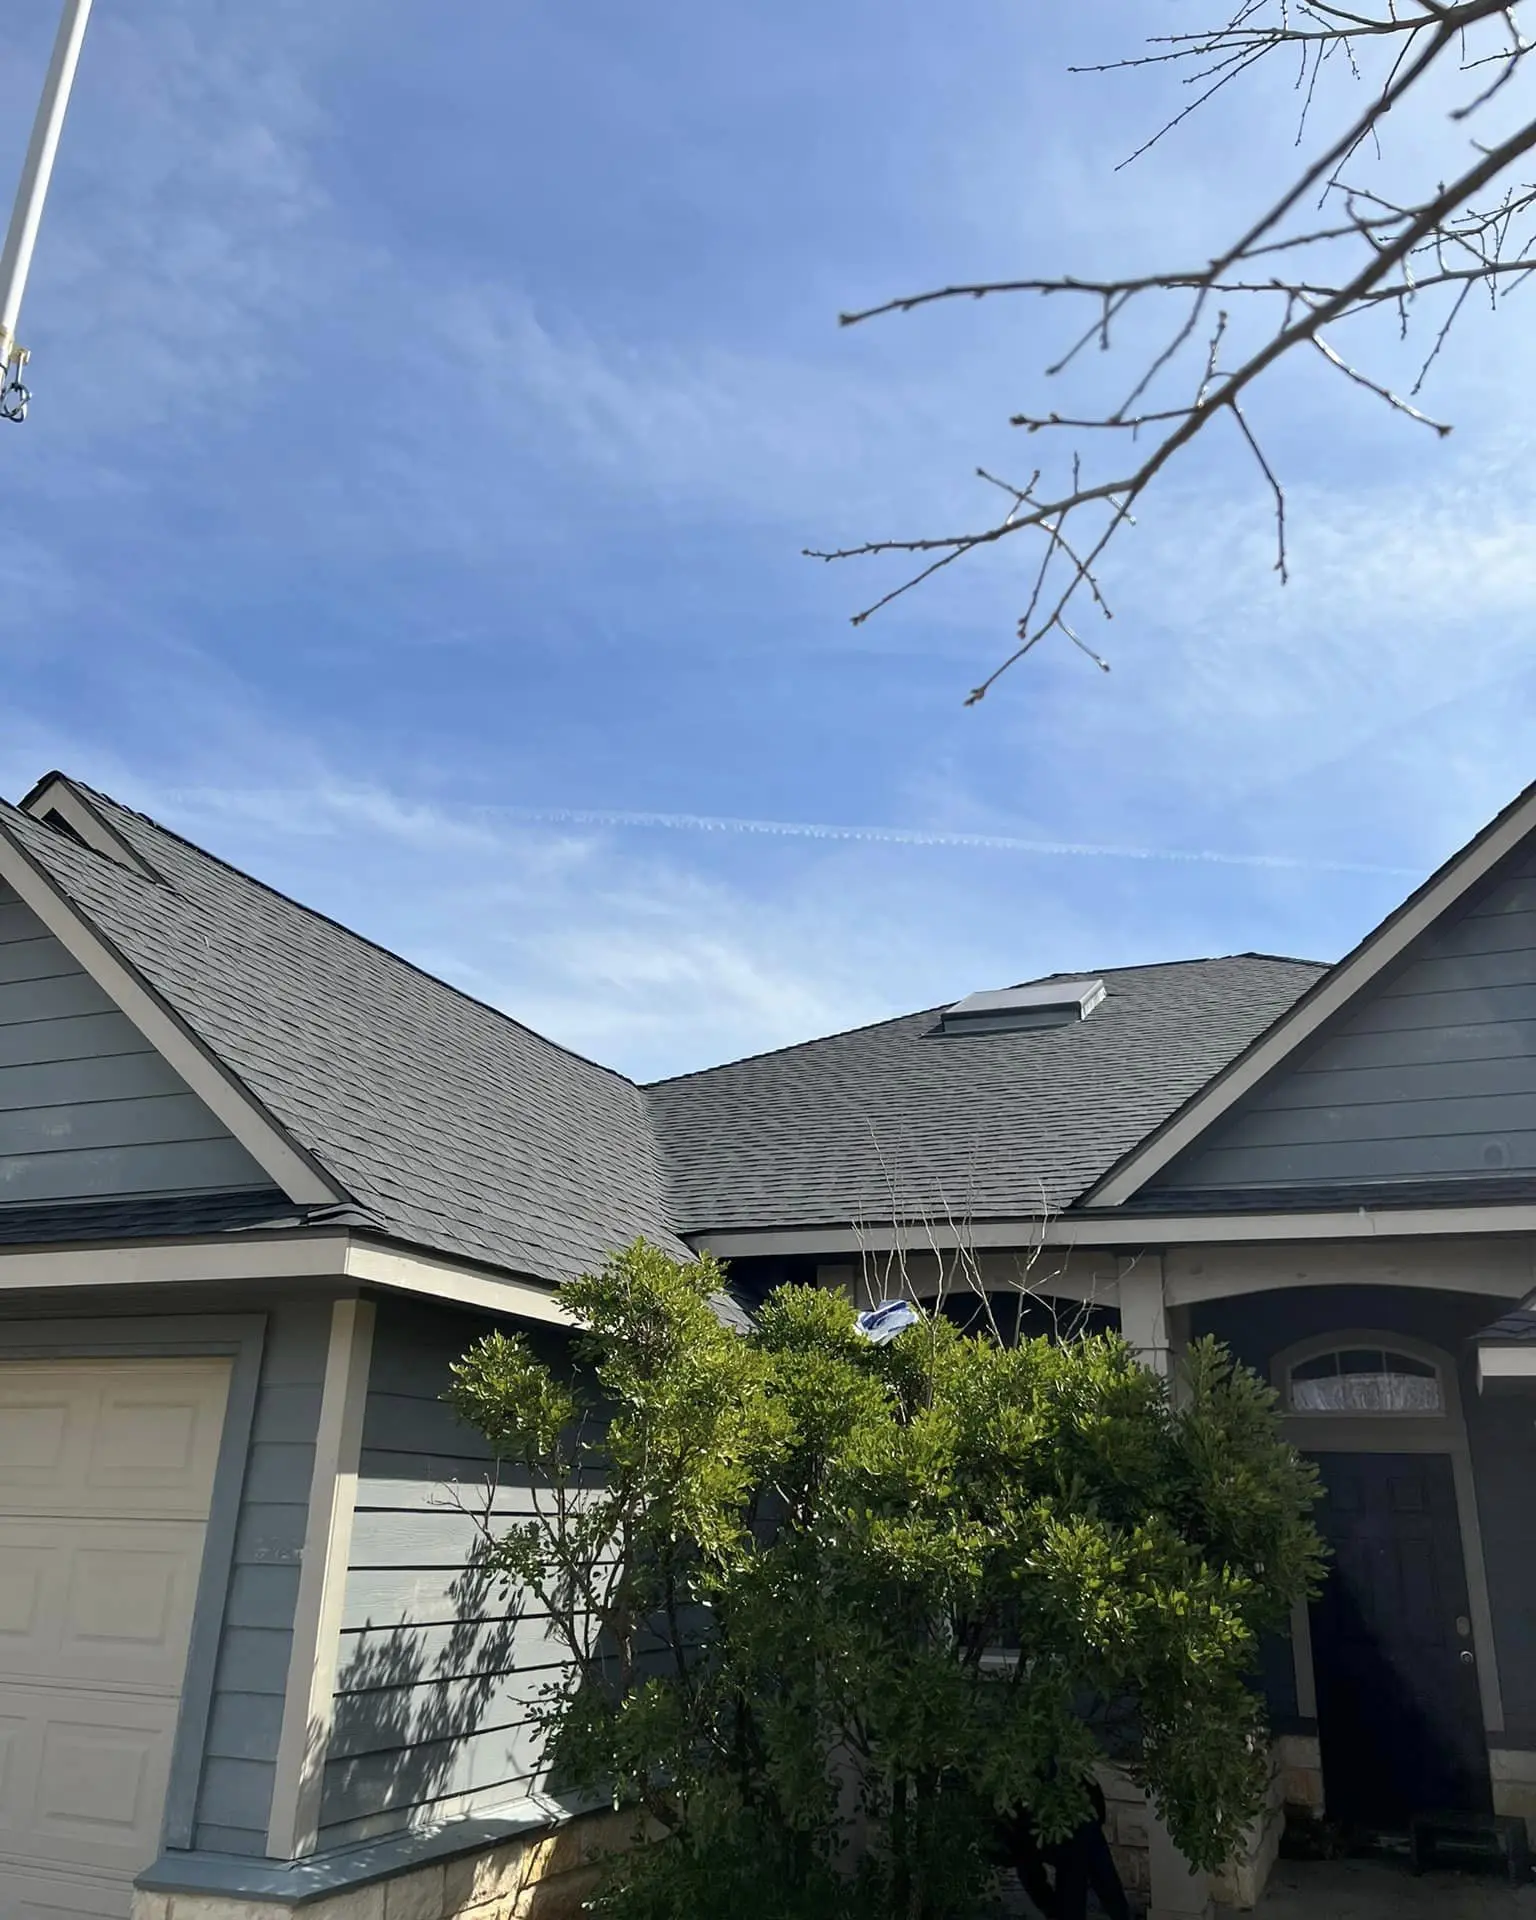 Recent roofing project completed by Roof On Texas in Waco, Texas.